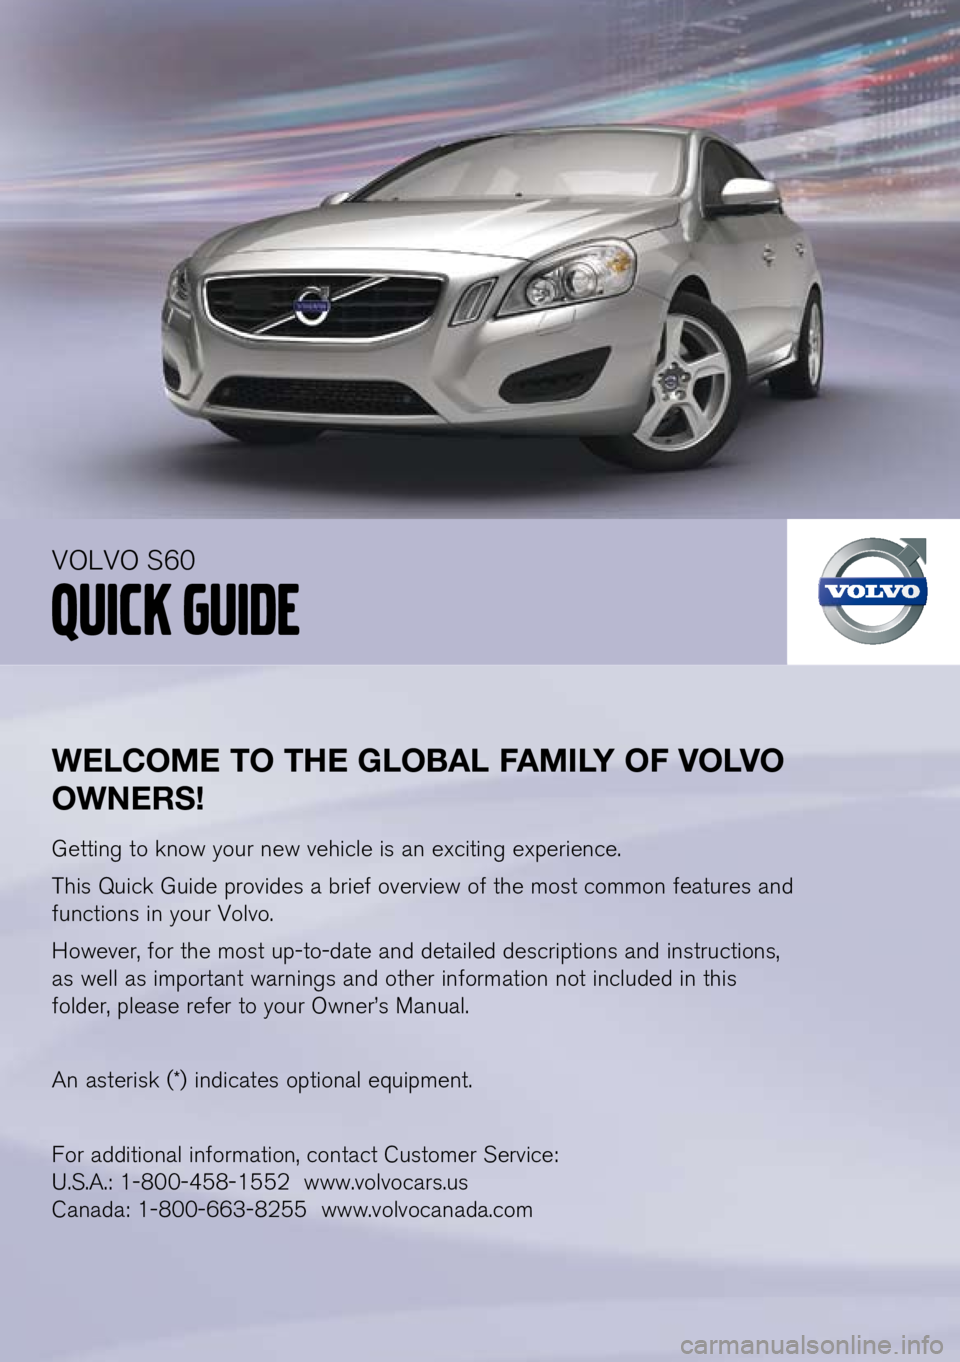 VOLVO S60 2011  Quick Guide 
WElCOME TO THE G lOBA l FAMI lY OF  vO lv O 
OWNERS!
Getting to know your new vehicle is an exciting experience.
This Quick Guide provides a brief overview of the most common features and 
functions 